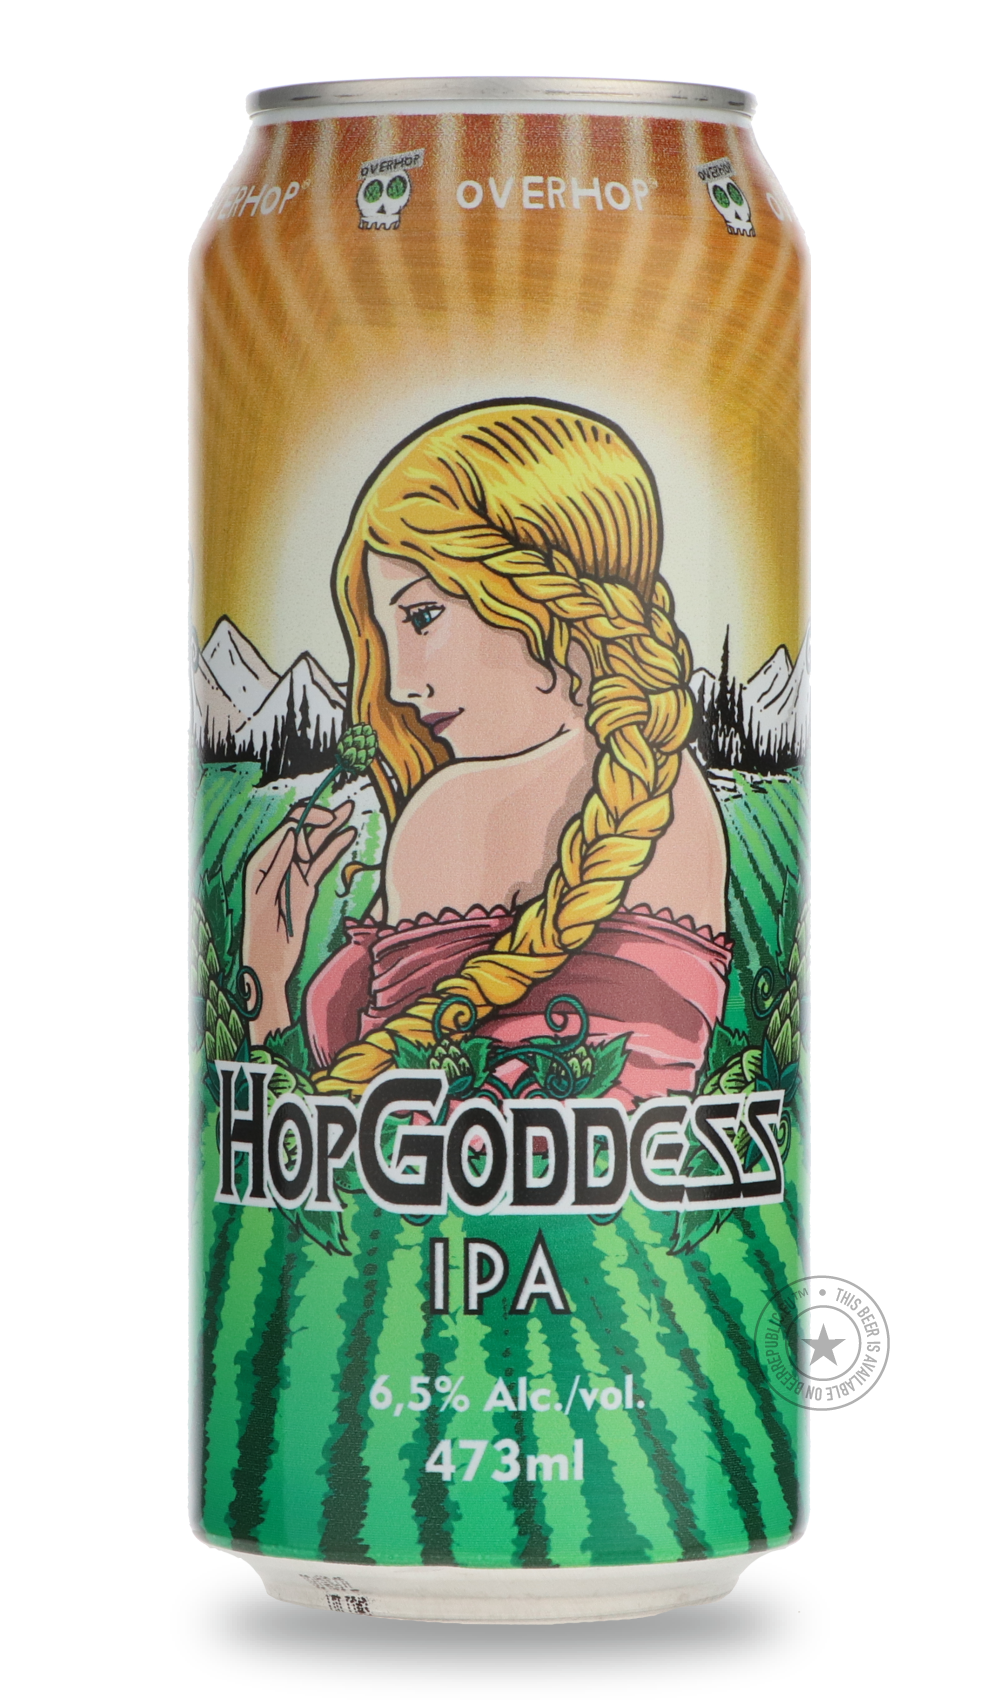 -OverHop Canada- HopGoddess-IPA- Only @ Beer Republic - The best online beer store for American & Canadian craft beer - Buy beer online from the USA and Canada - Bier online kopen - Amerikaans bier kopen - Craft beer store - Craft beer kopen - Amerikanisch bier kaufen - Bier online kaufen - Acheter biere online - IPA - Stout - Porter - New England IPA - Hazy IPA - Imperial Stout - Barrel Aged - Barrel Aged Imperial Stout - Brown - Dark beer - Blond - Blonde - Pilsner - Lager - Wheat - Weizen - Amber - Barle